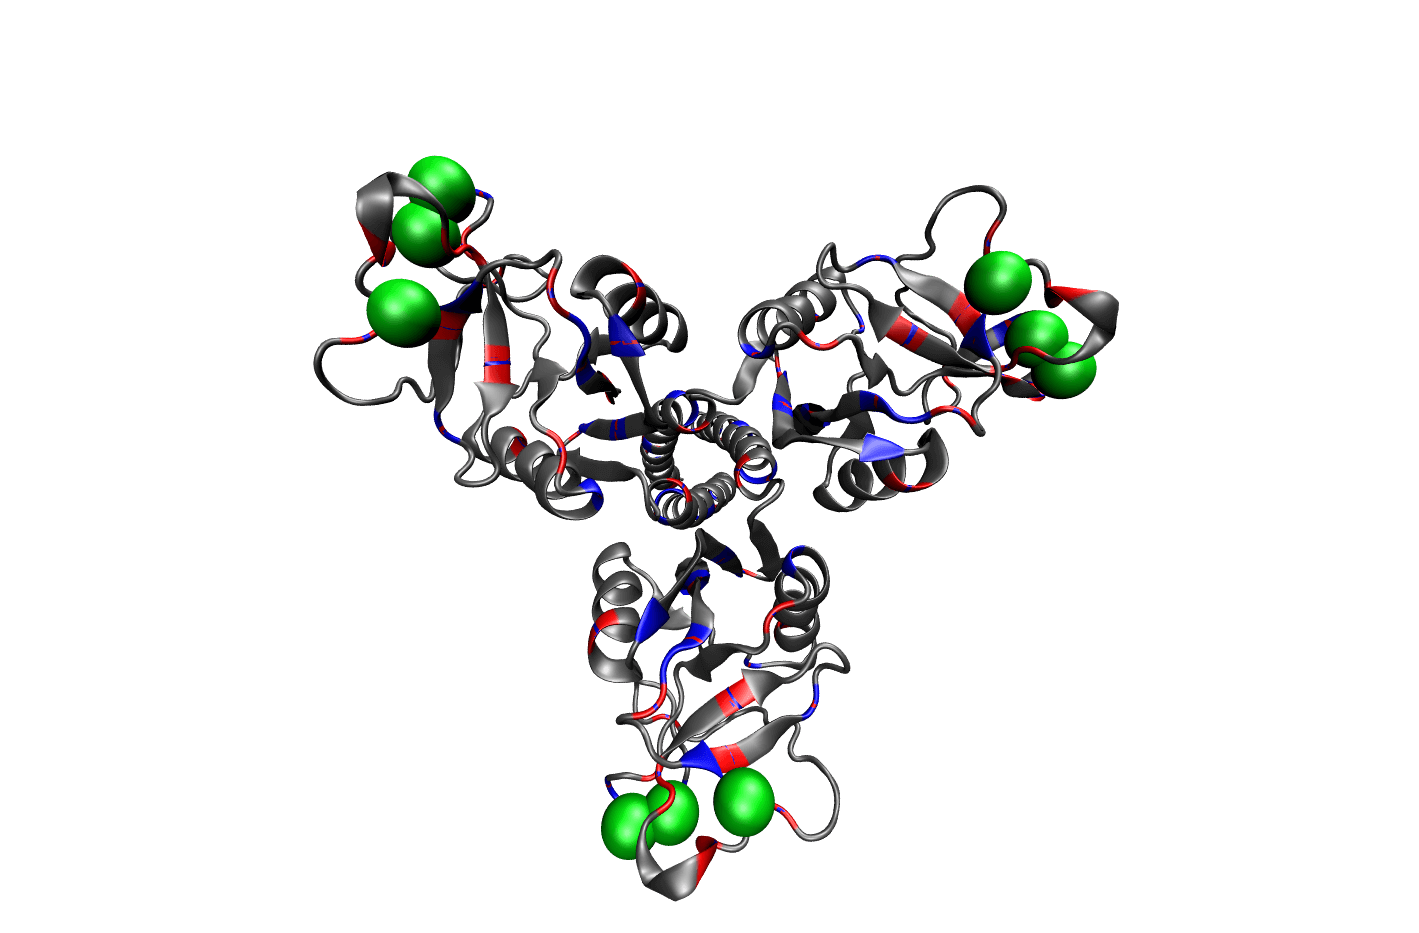 Trimeric structure of Surfactant Protein D (SP-D). Negatively charged residues are shown in red, positive residues are shown in blue, and neutral residues are shown in grey, and the calcium ions are shown in green.